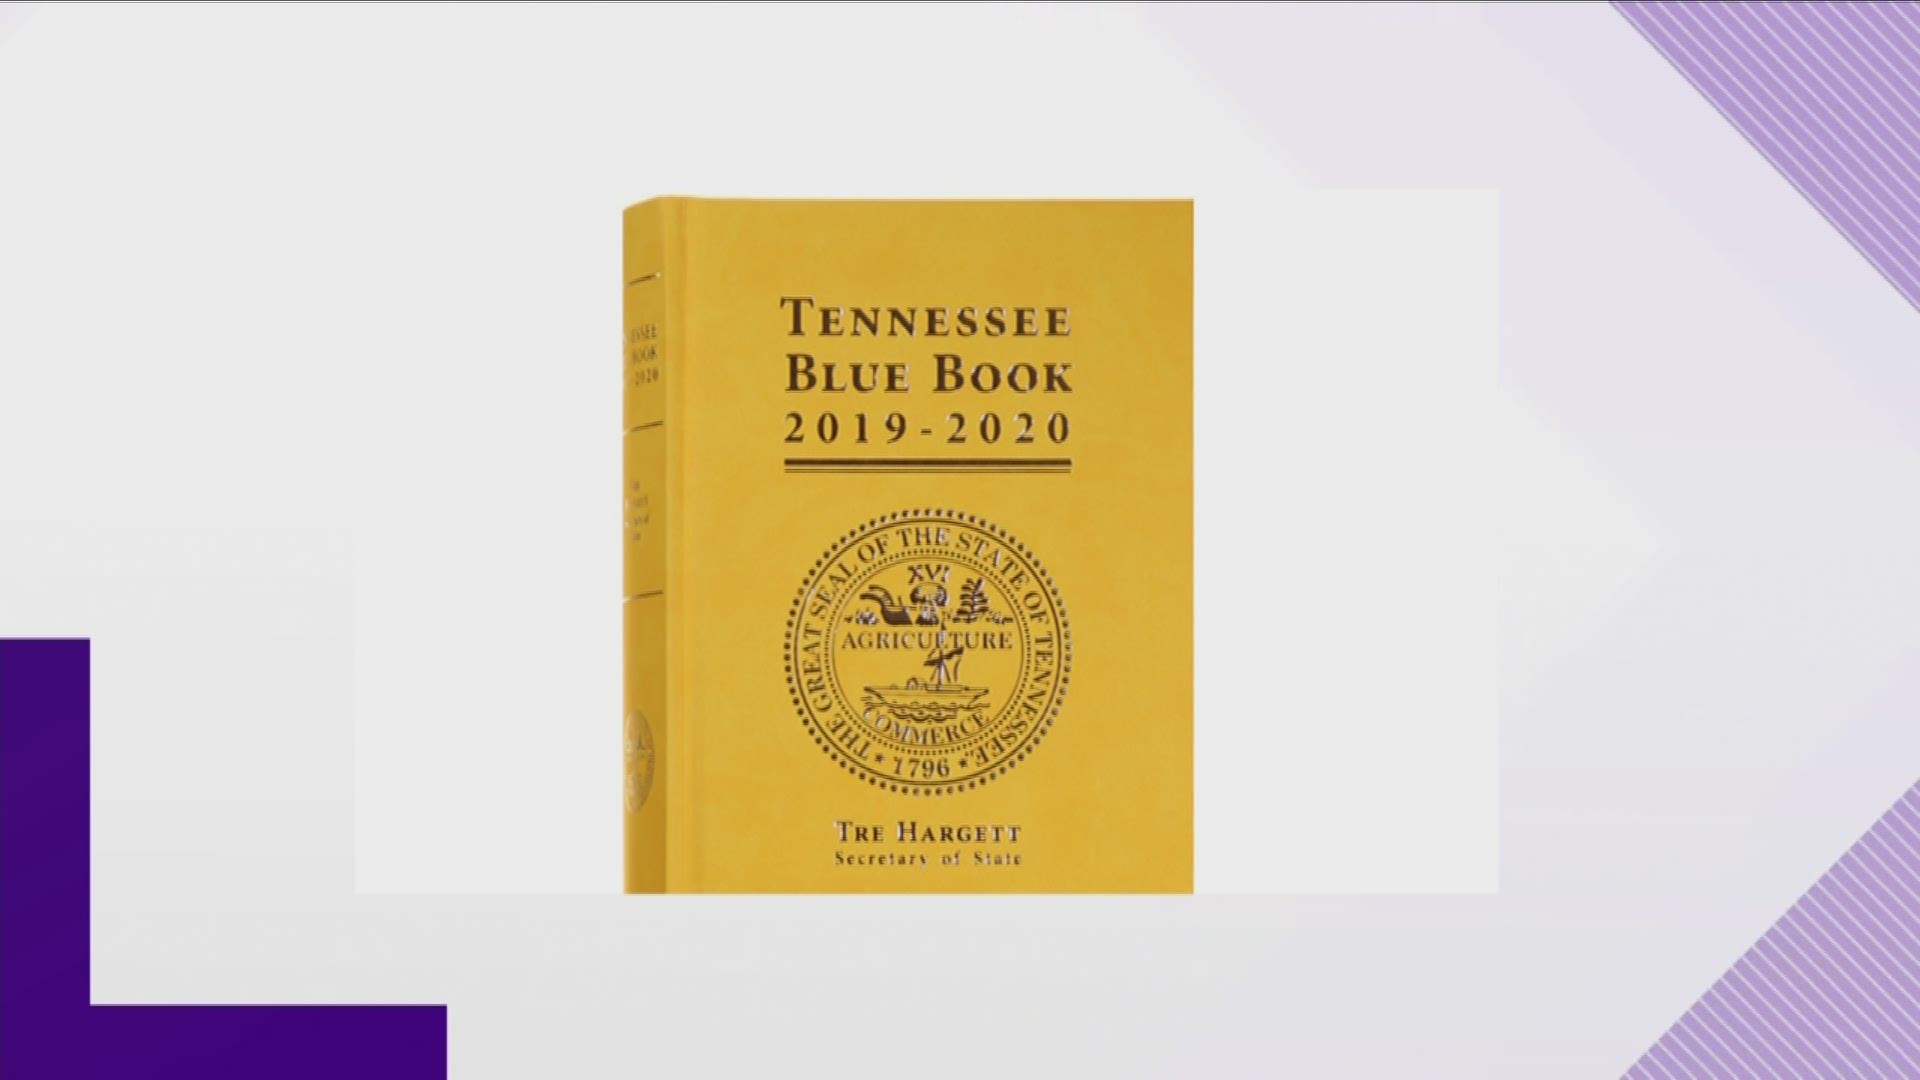 The Blue Book includes information about the state government, history, and lawmakers -- and this year will be yellow to represent the state's role in suffrage.